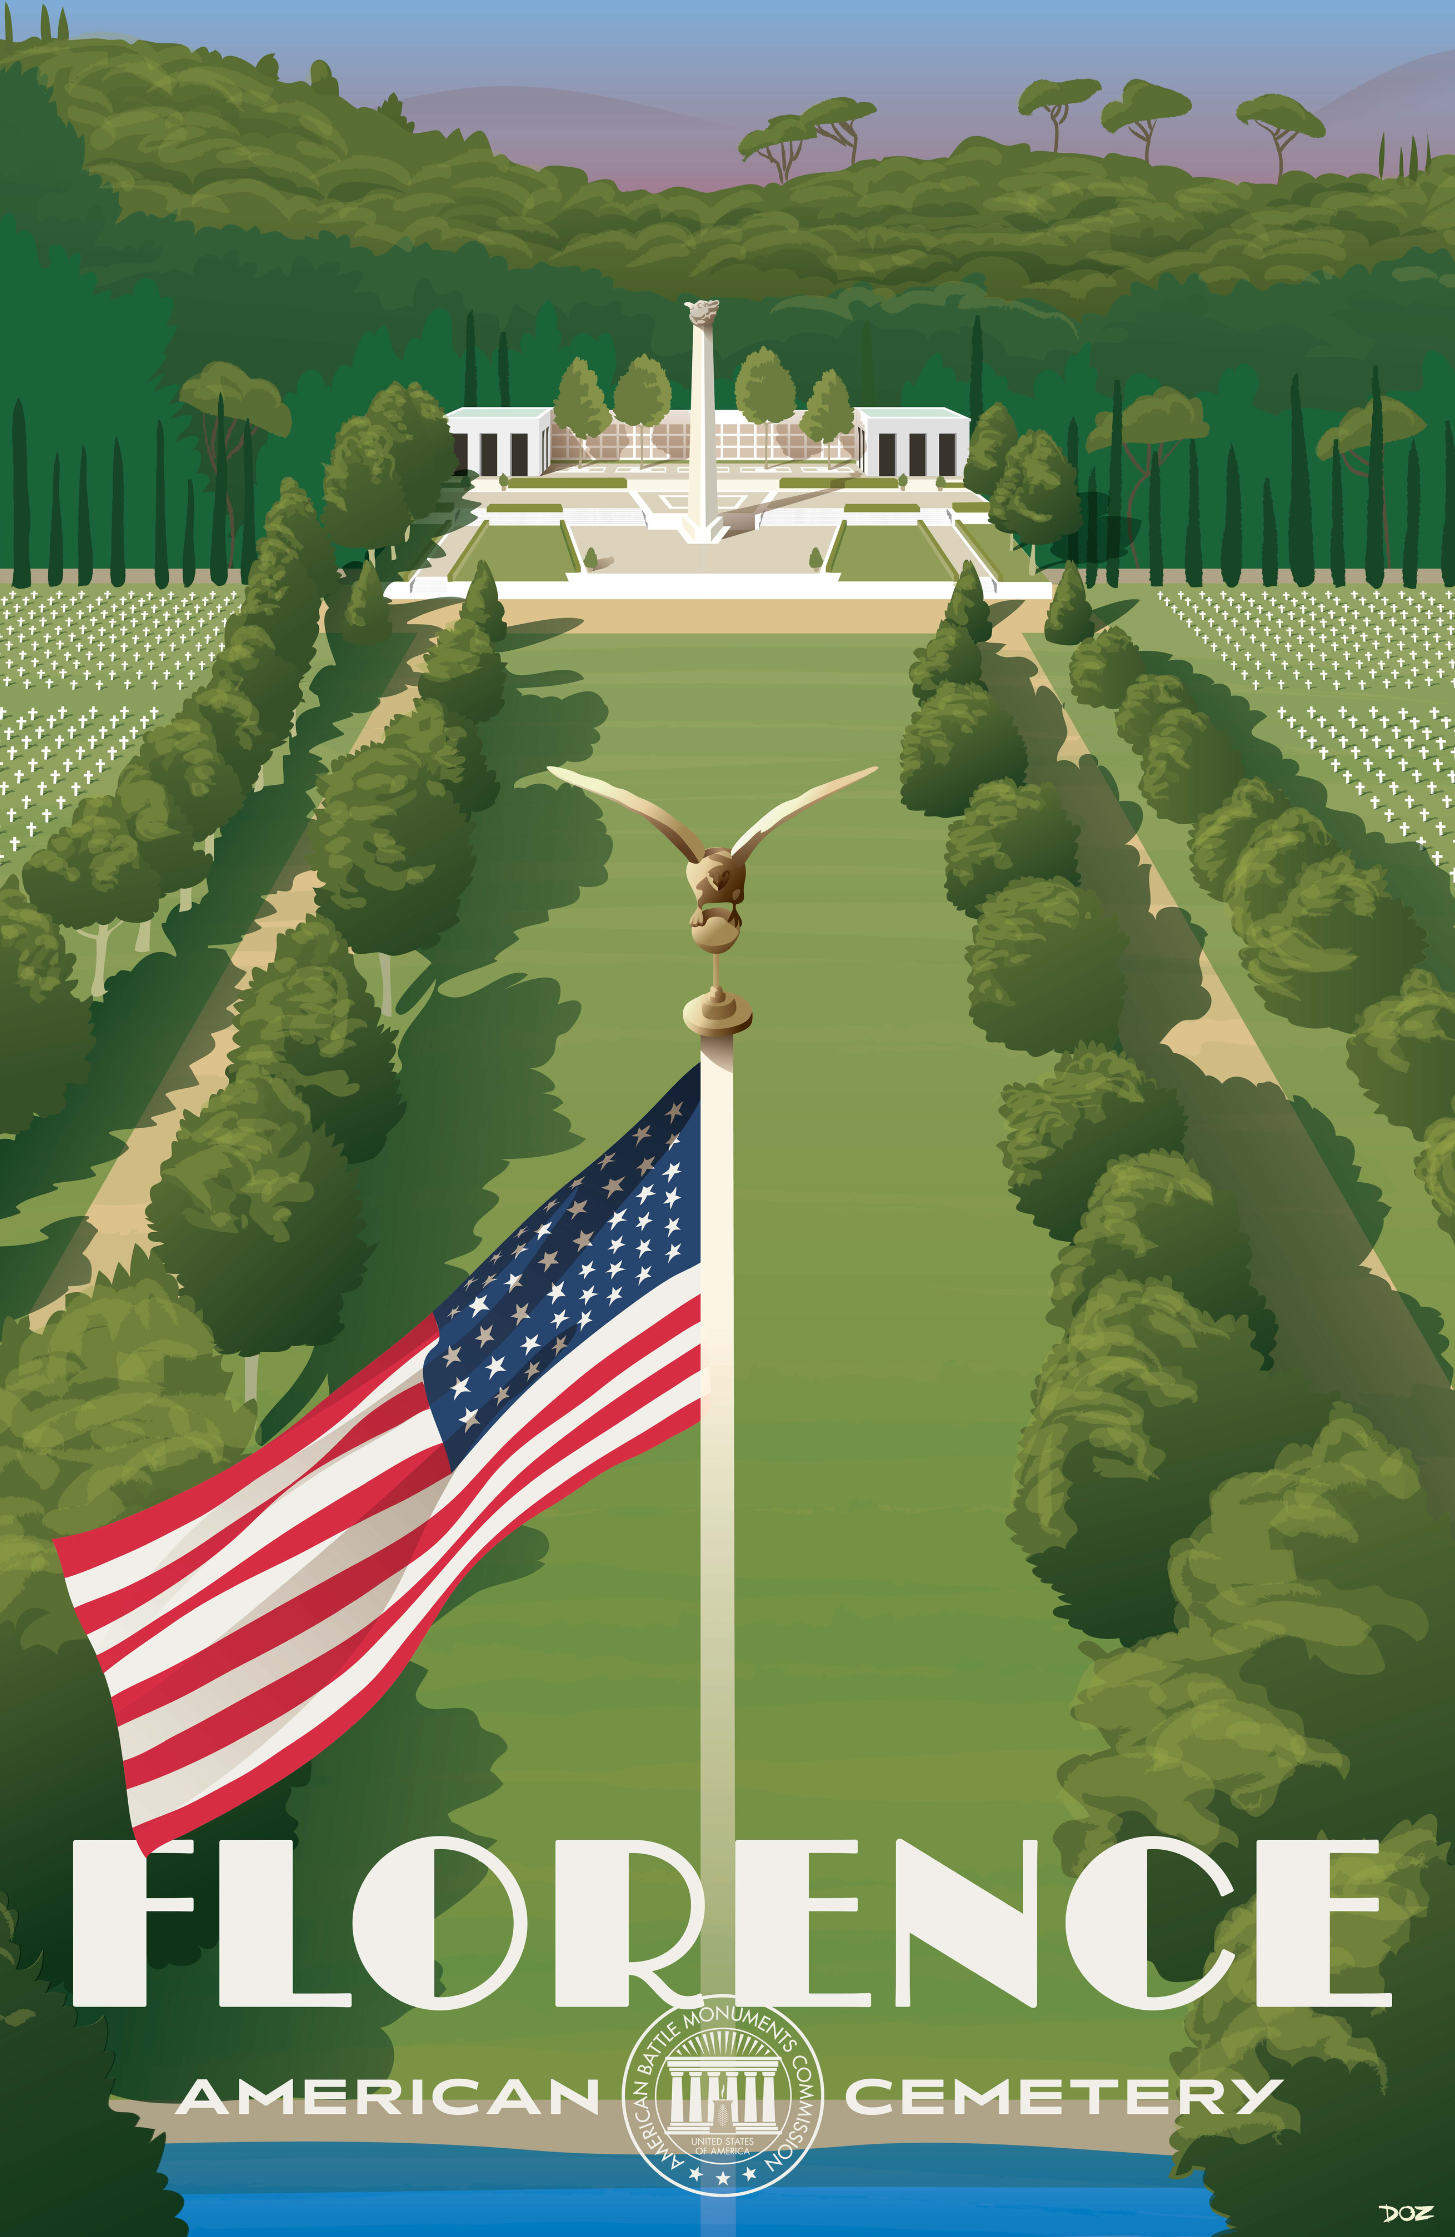 Vintage poster of Florence American Cemetery created to mark ABMC Centennial